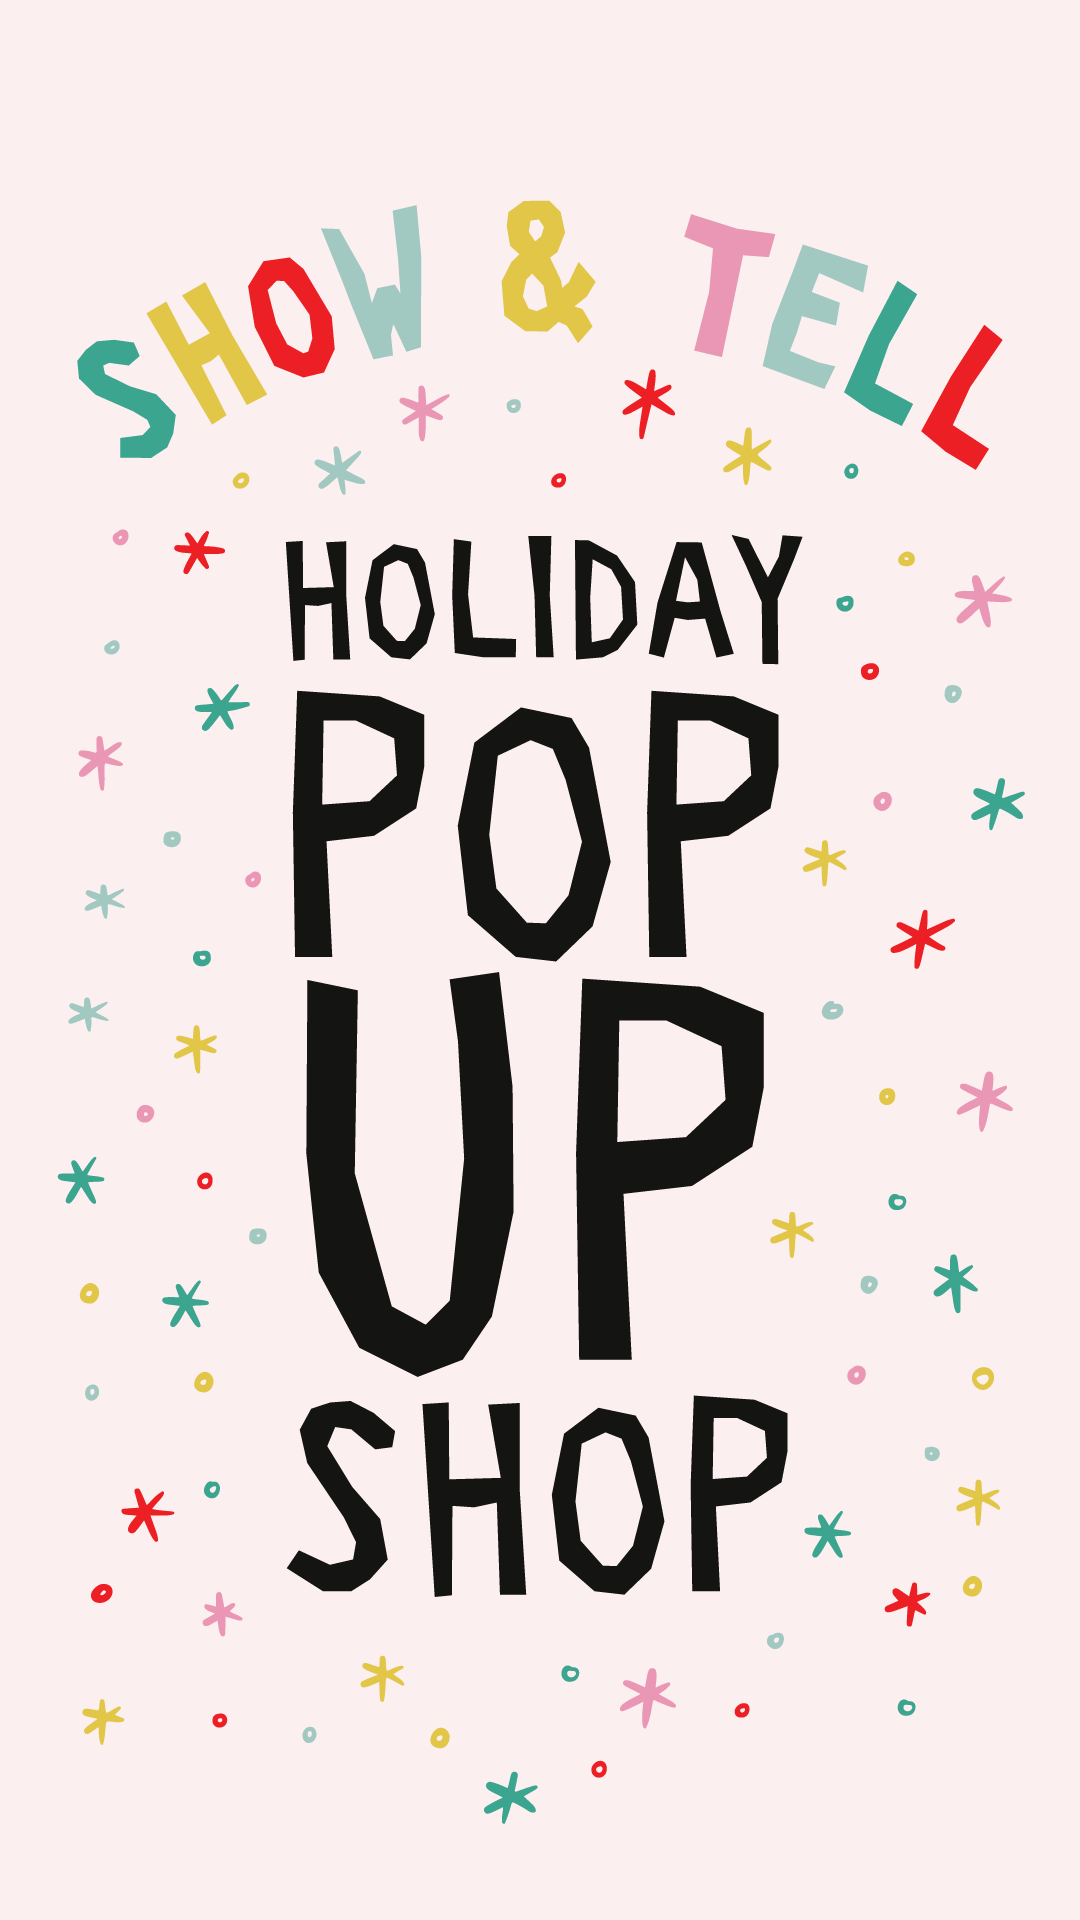 Holiday Media Kit — Show And Tell Pop Up Shop